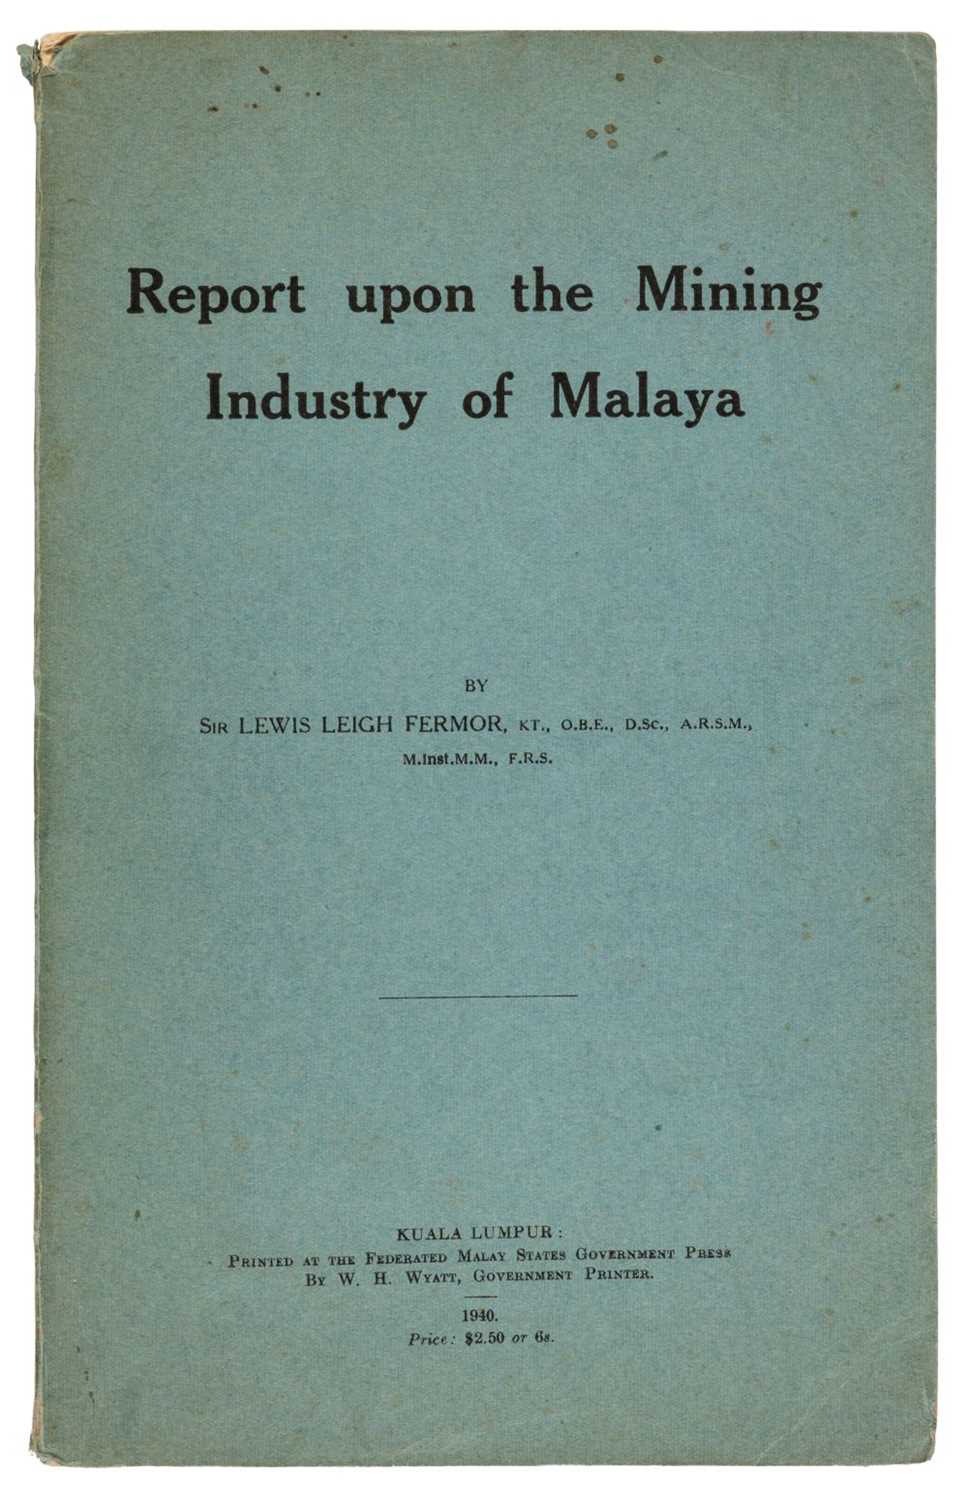 Lot 12 - Fermor (Lewis Leigh). Report upon the Mining Industry of Malaya, 1st edition, 2nd impression, 1940